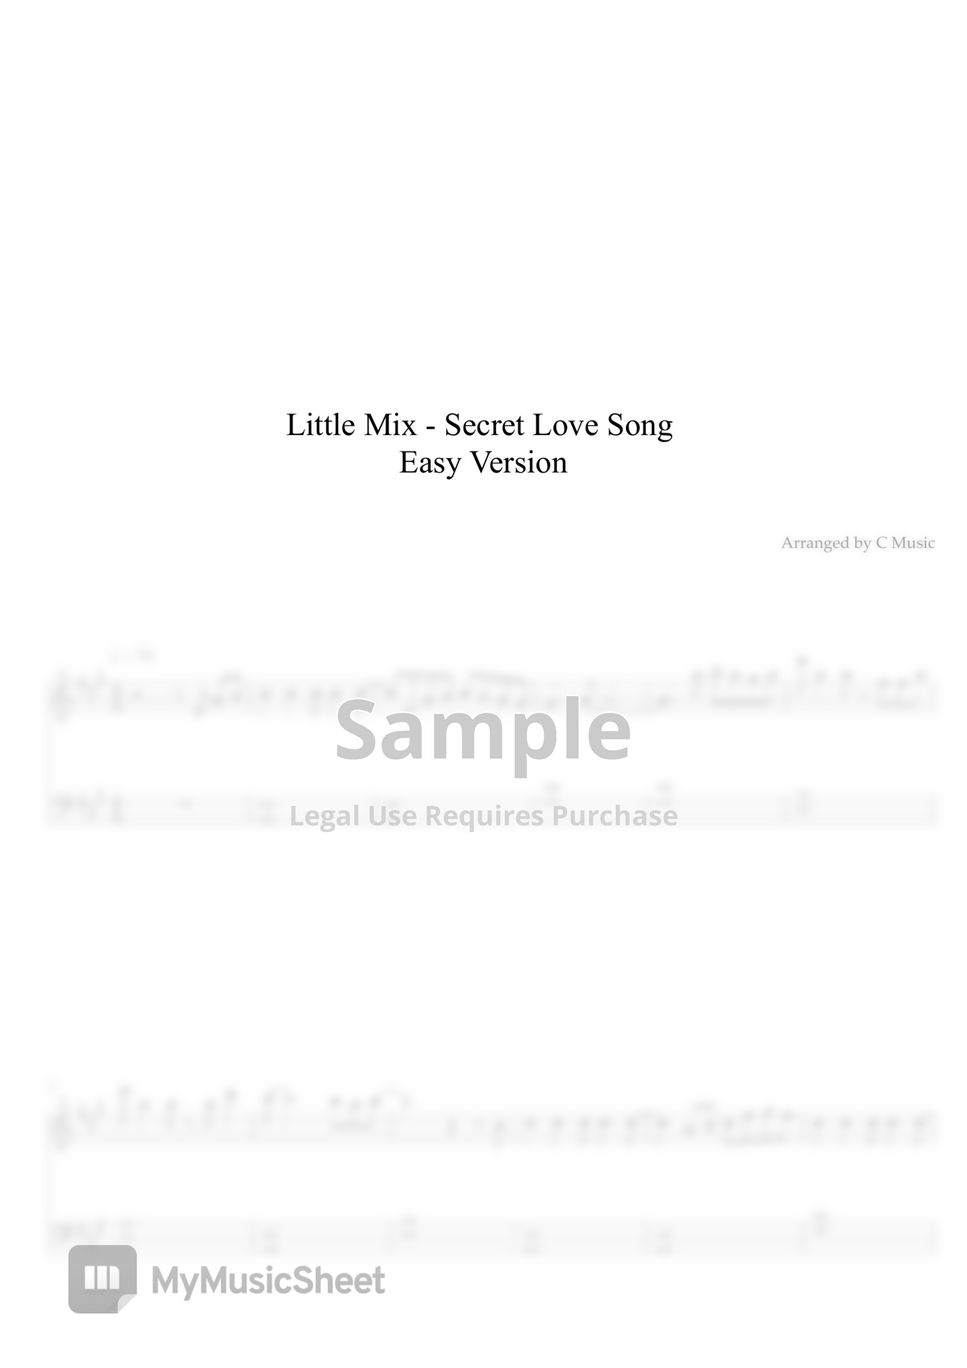 Little Mix - Secret Love Song (Easy Version) by C Music